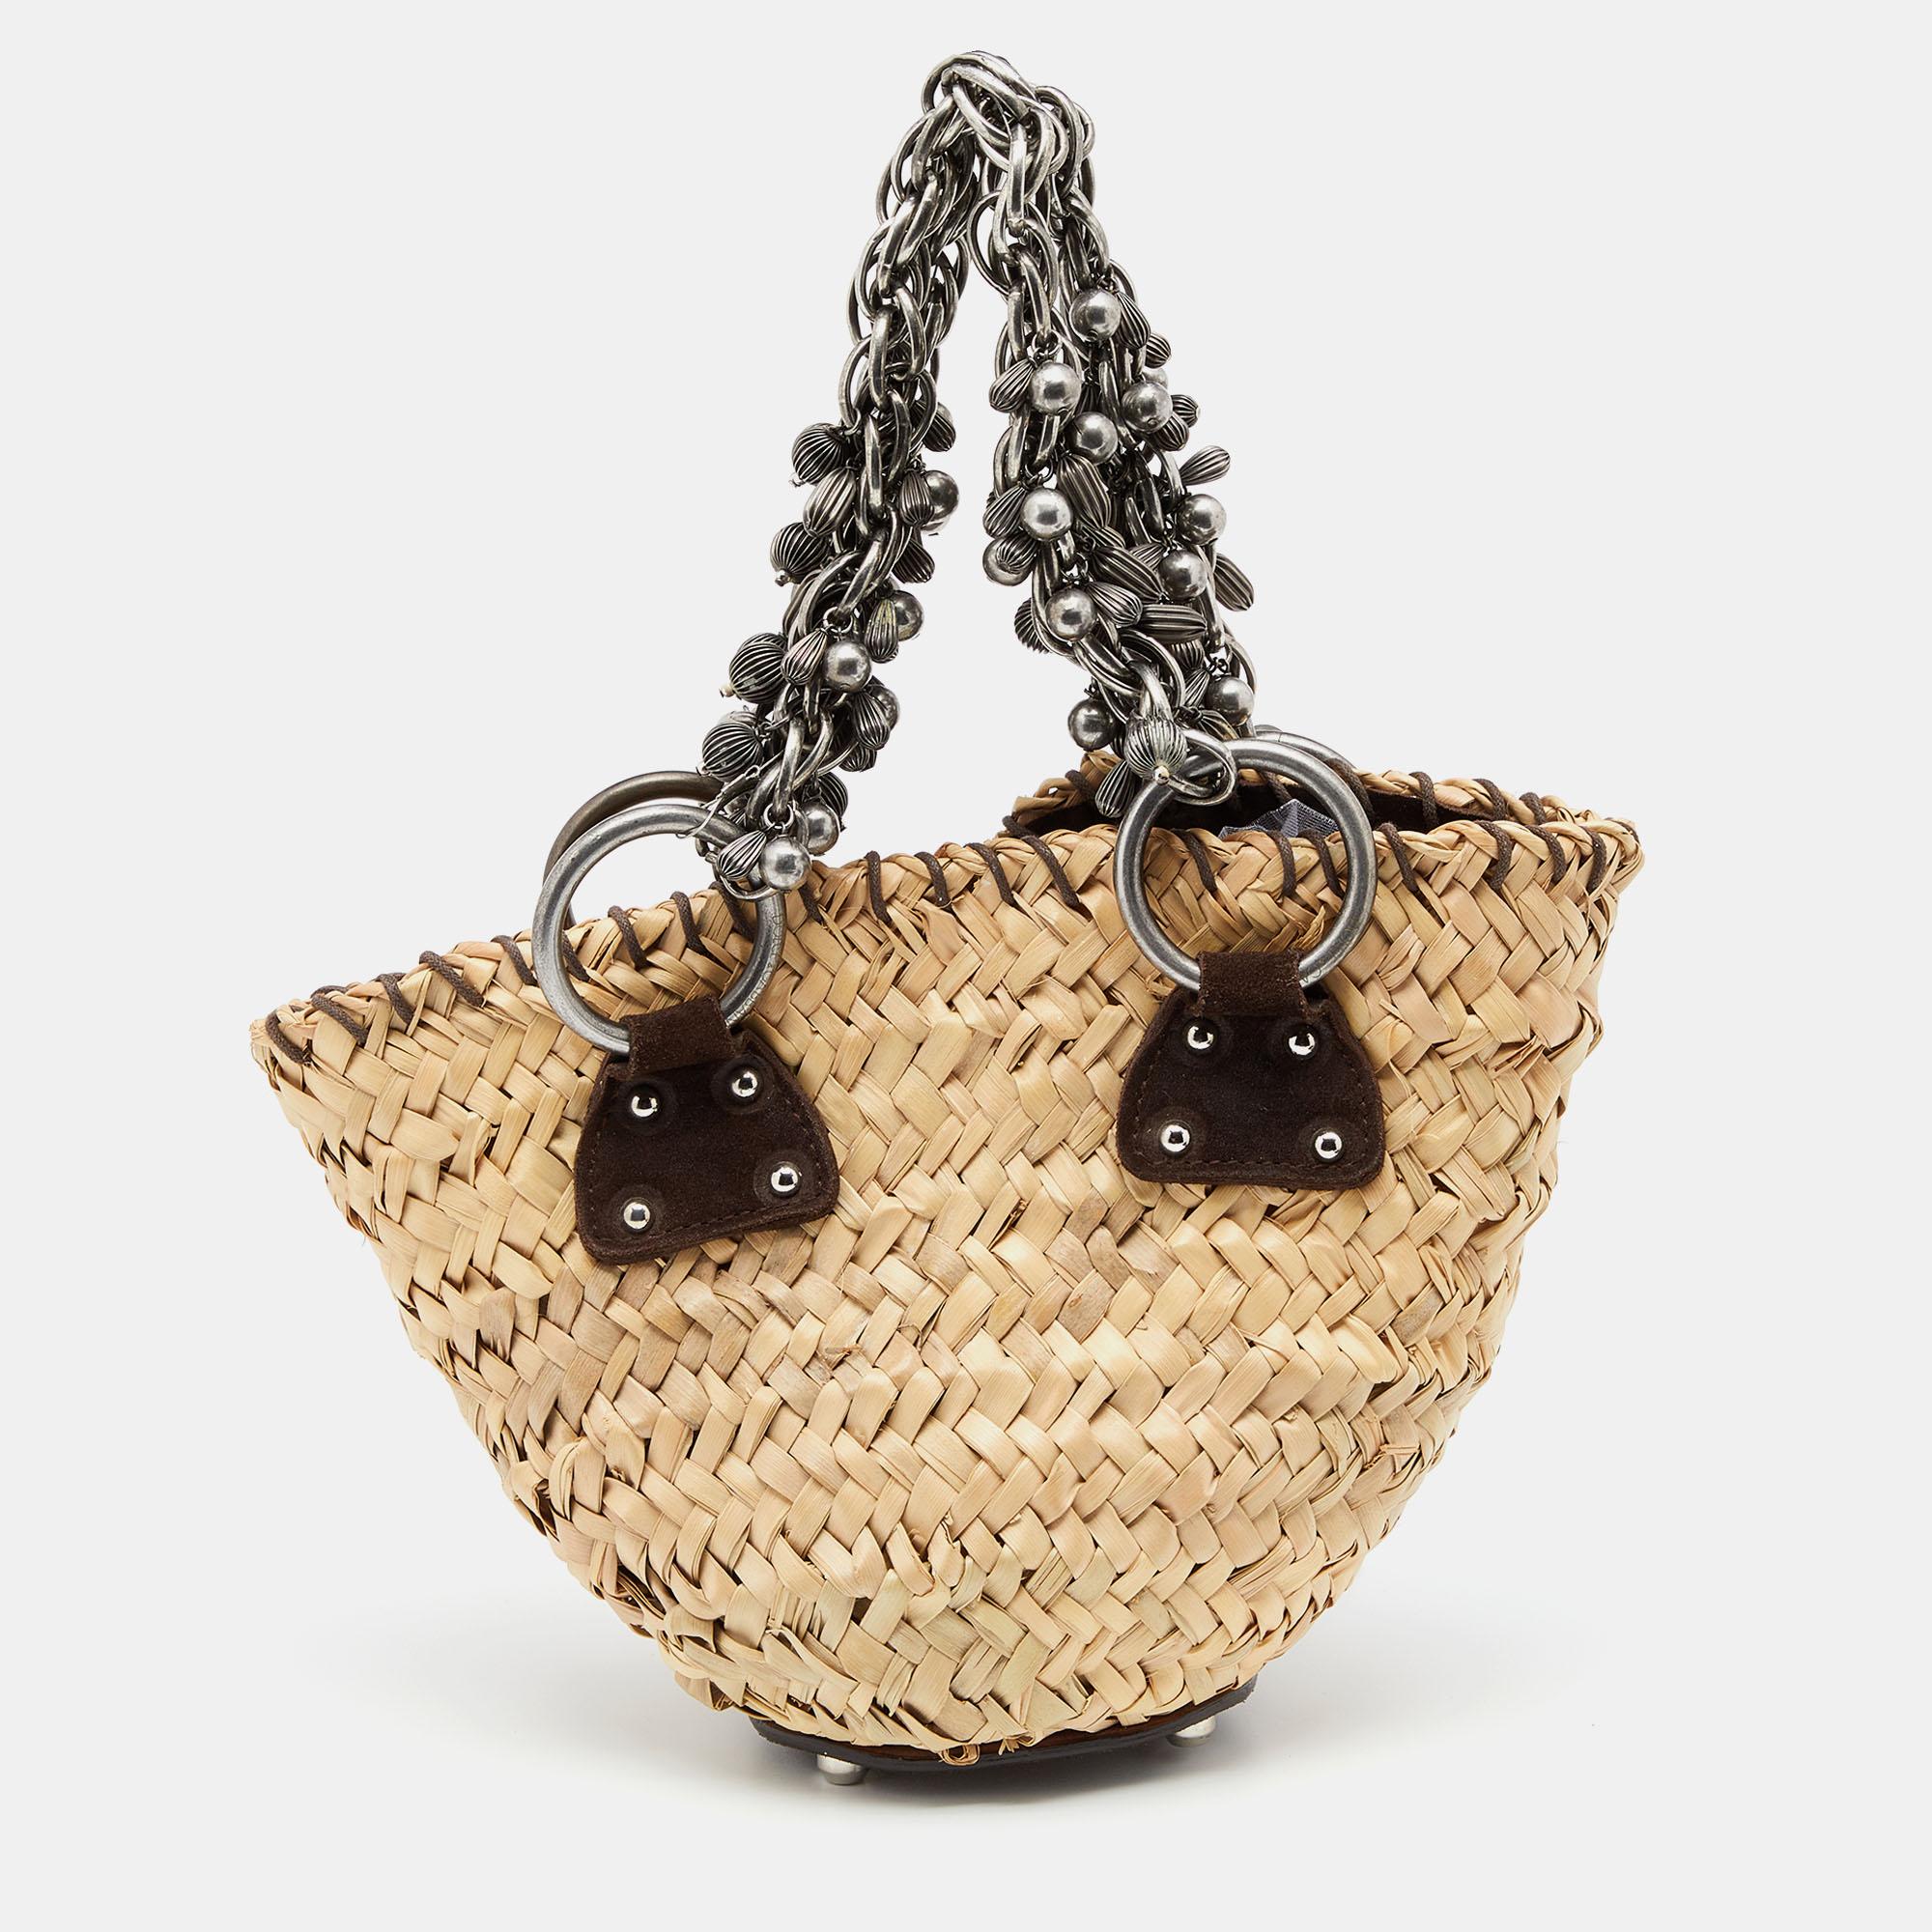 If you get this Dolce & Gabbana bag, you'll be carrying the cutest bag this season. Made from straw and suede in a mini size, the bag is elevated with chain handles for an eye-catching finish.

